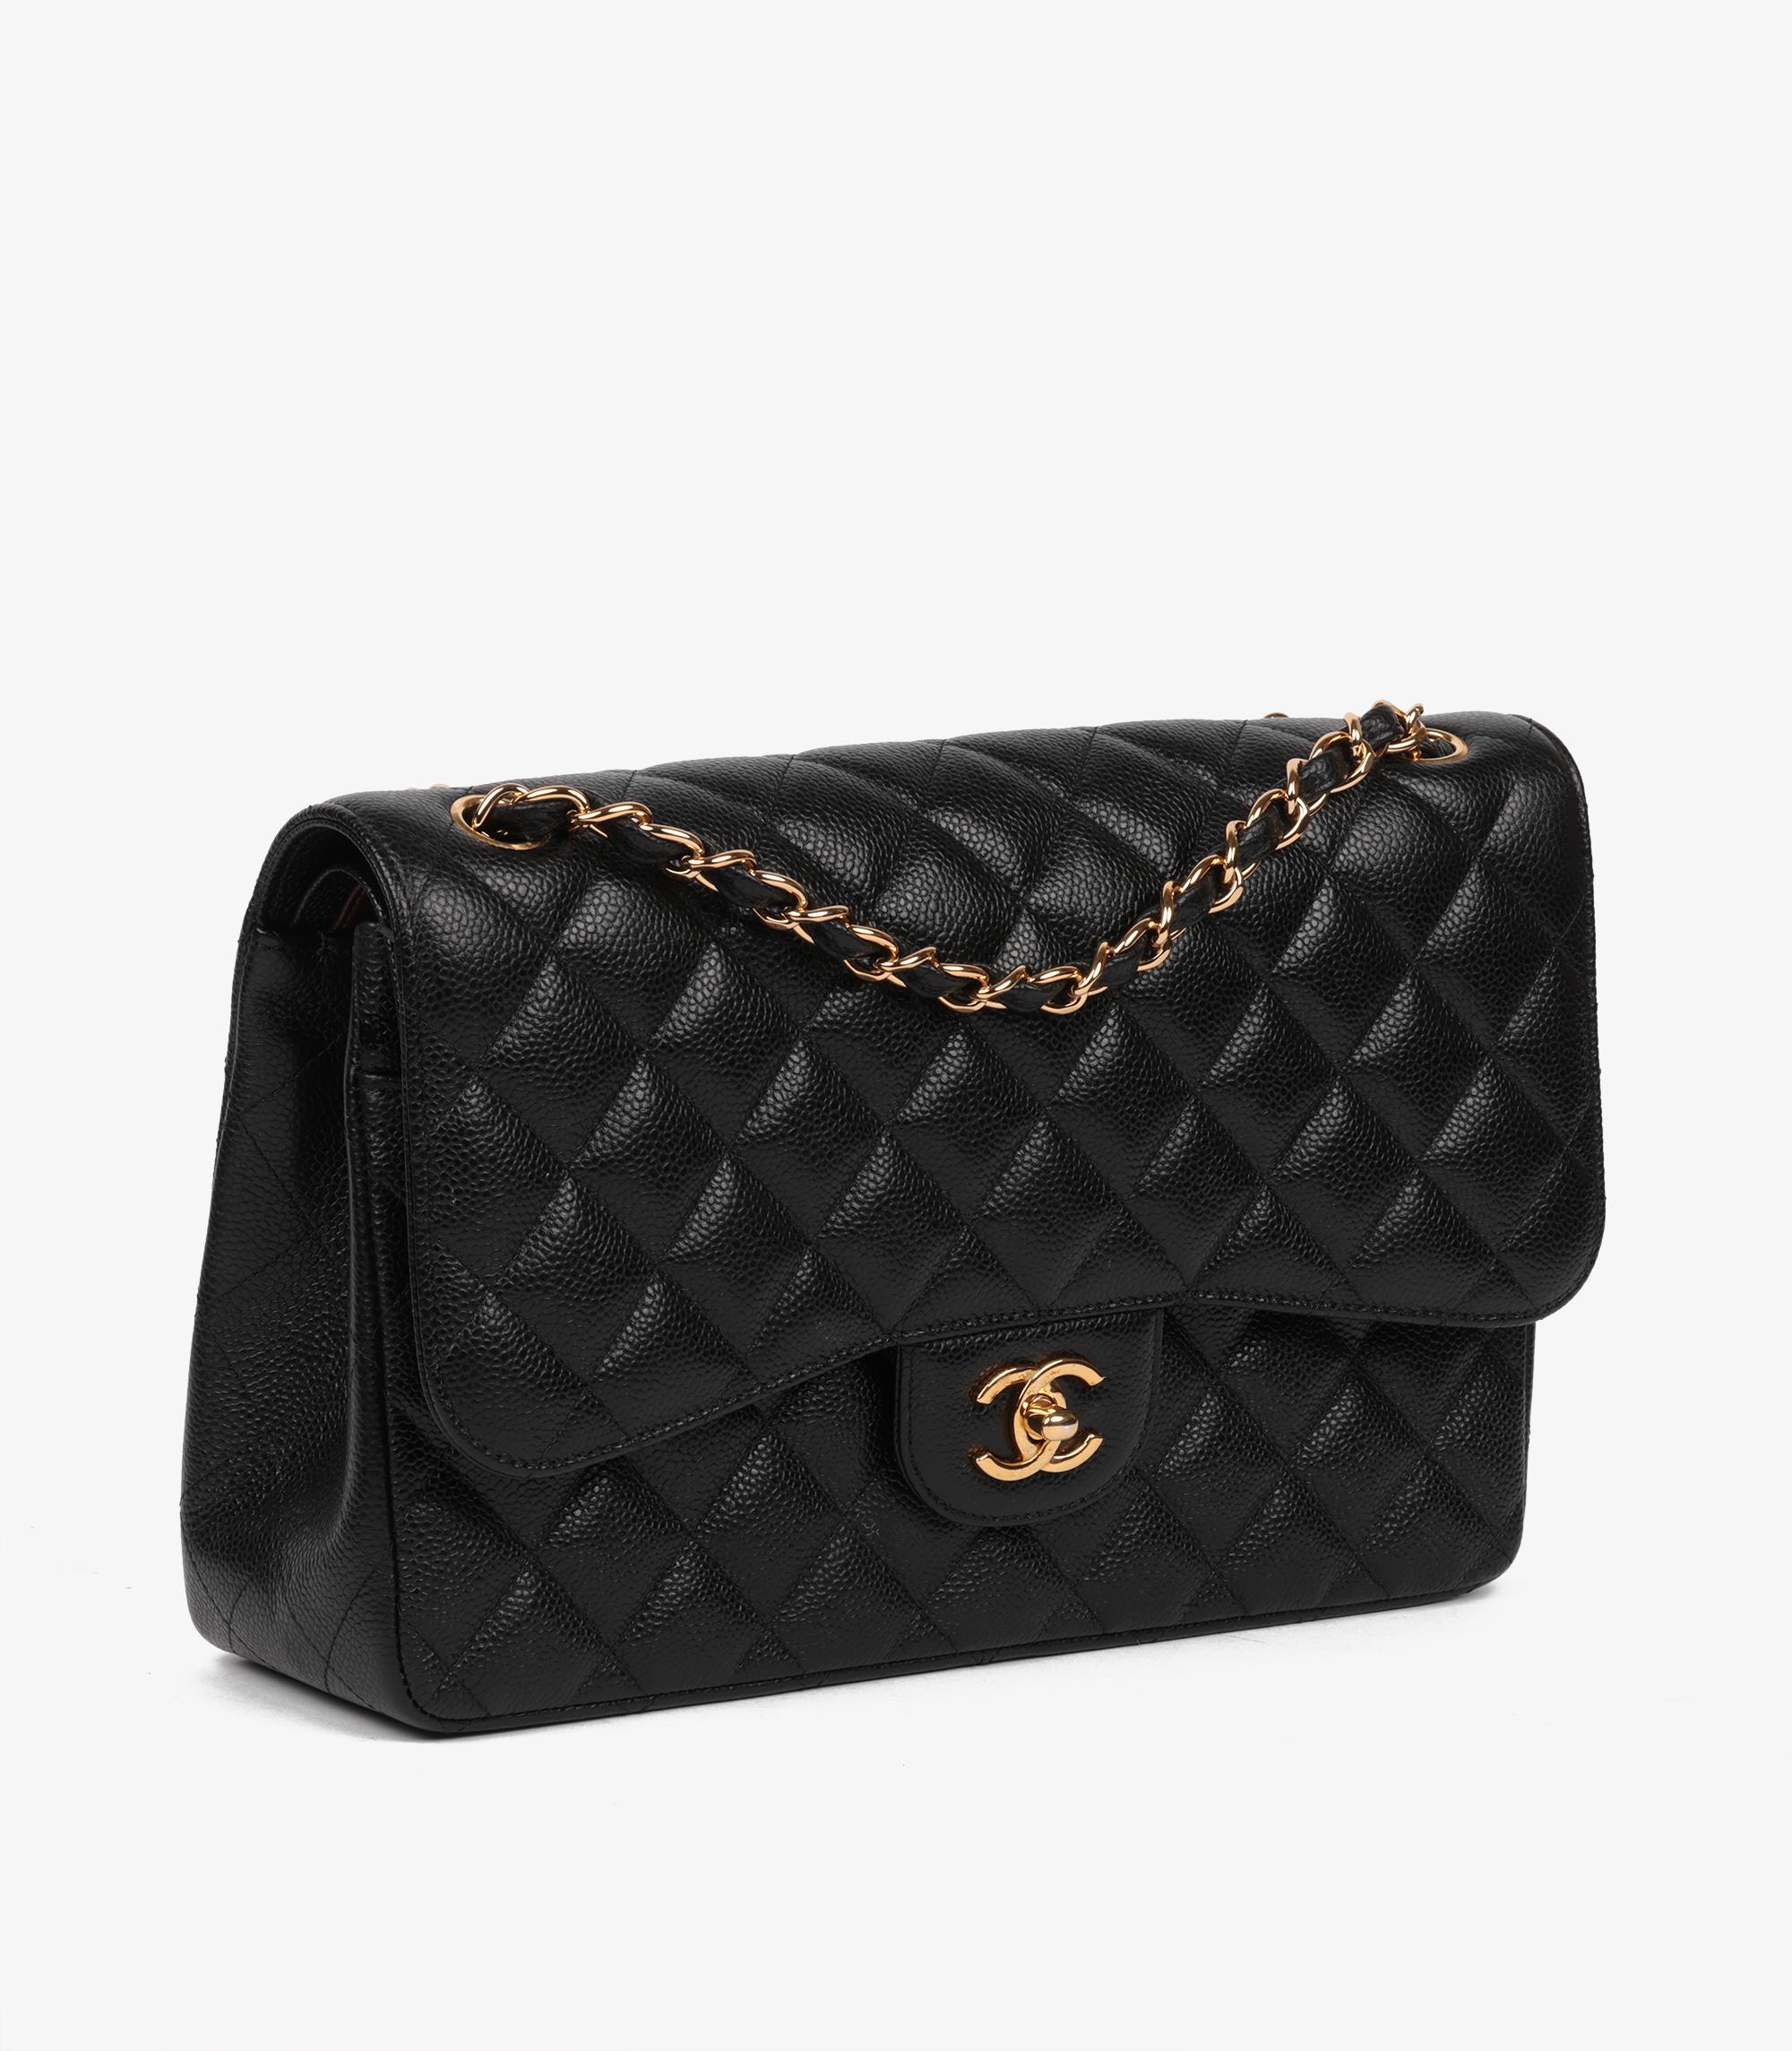 Chanel Black Quilted Caviar Leather Jumbo Classic Double Flap Bag In Excellent Condition For Sale In Bishop's Stortford, Hertfordshire